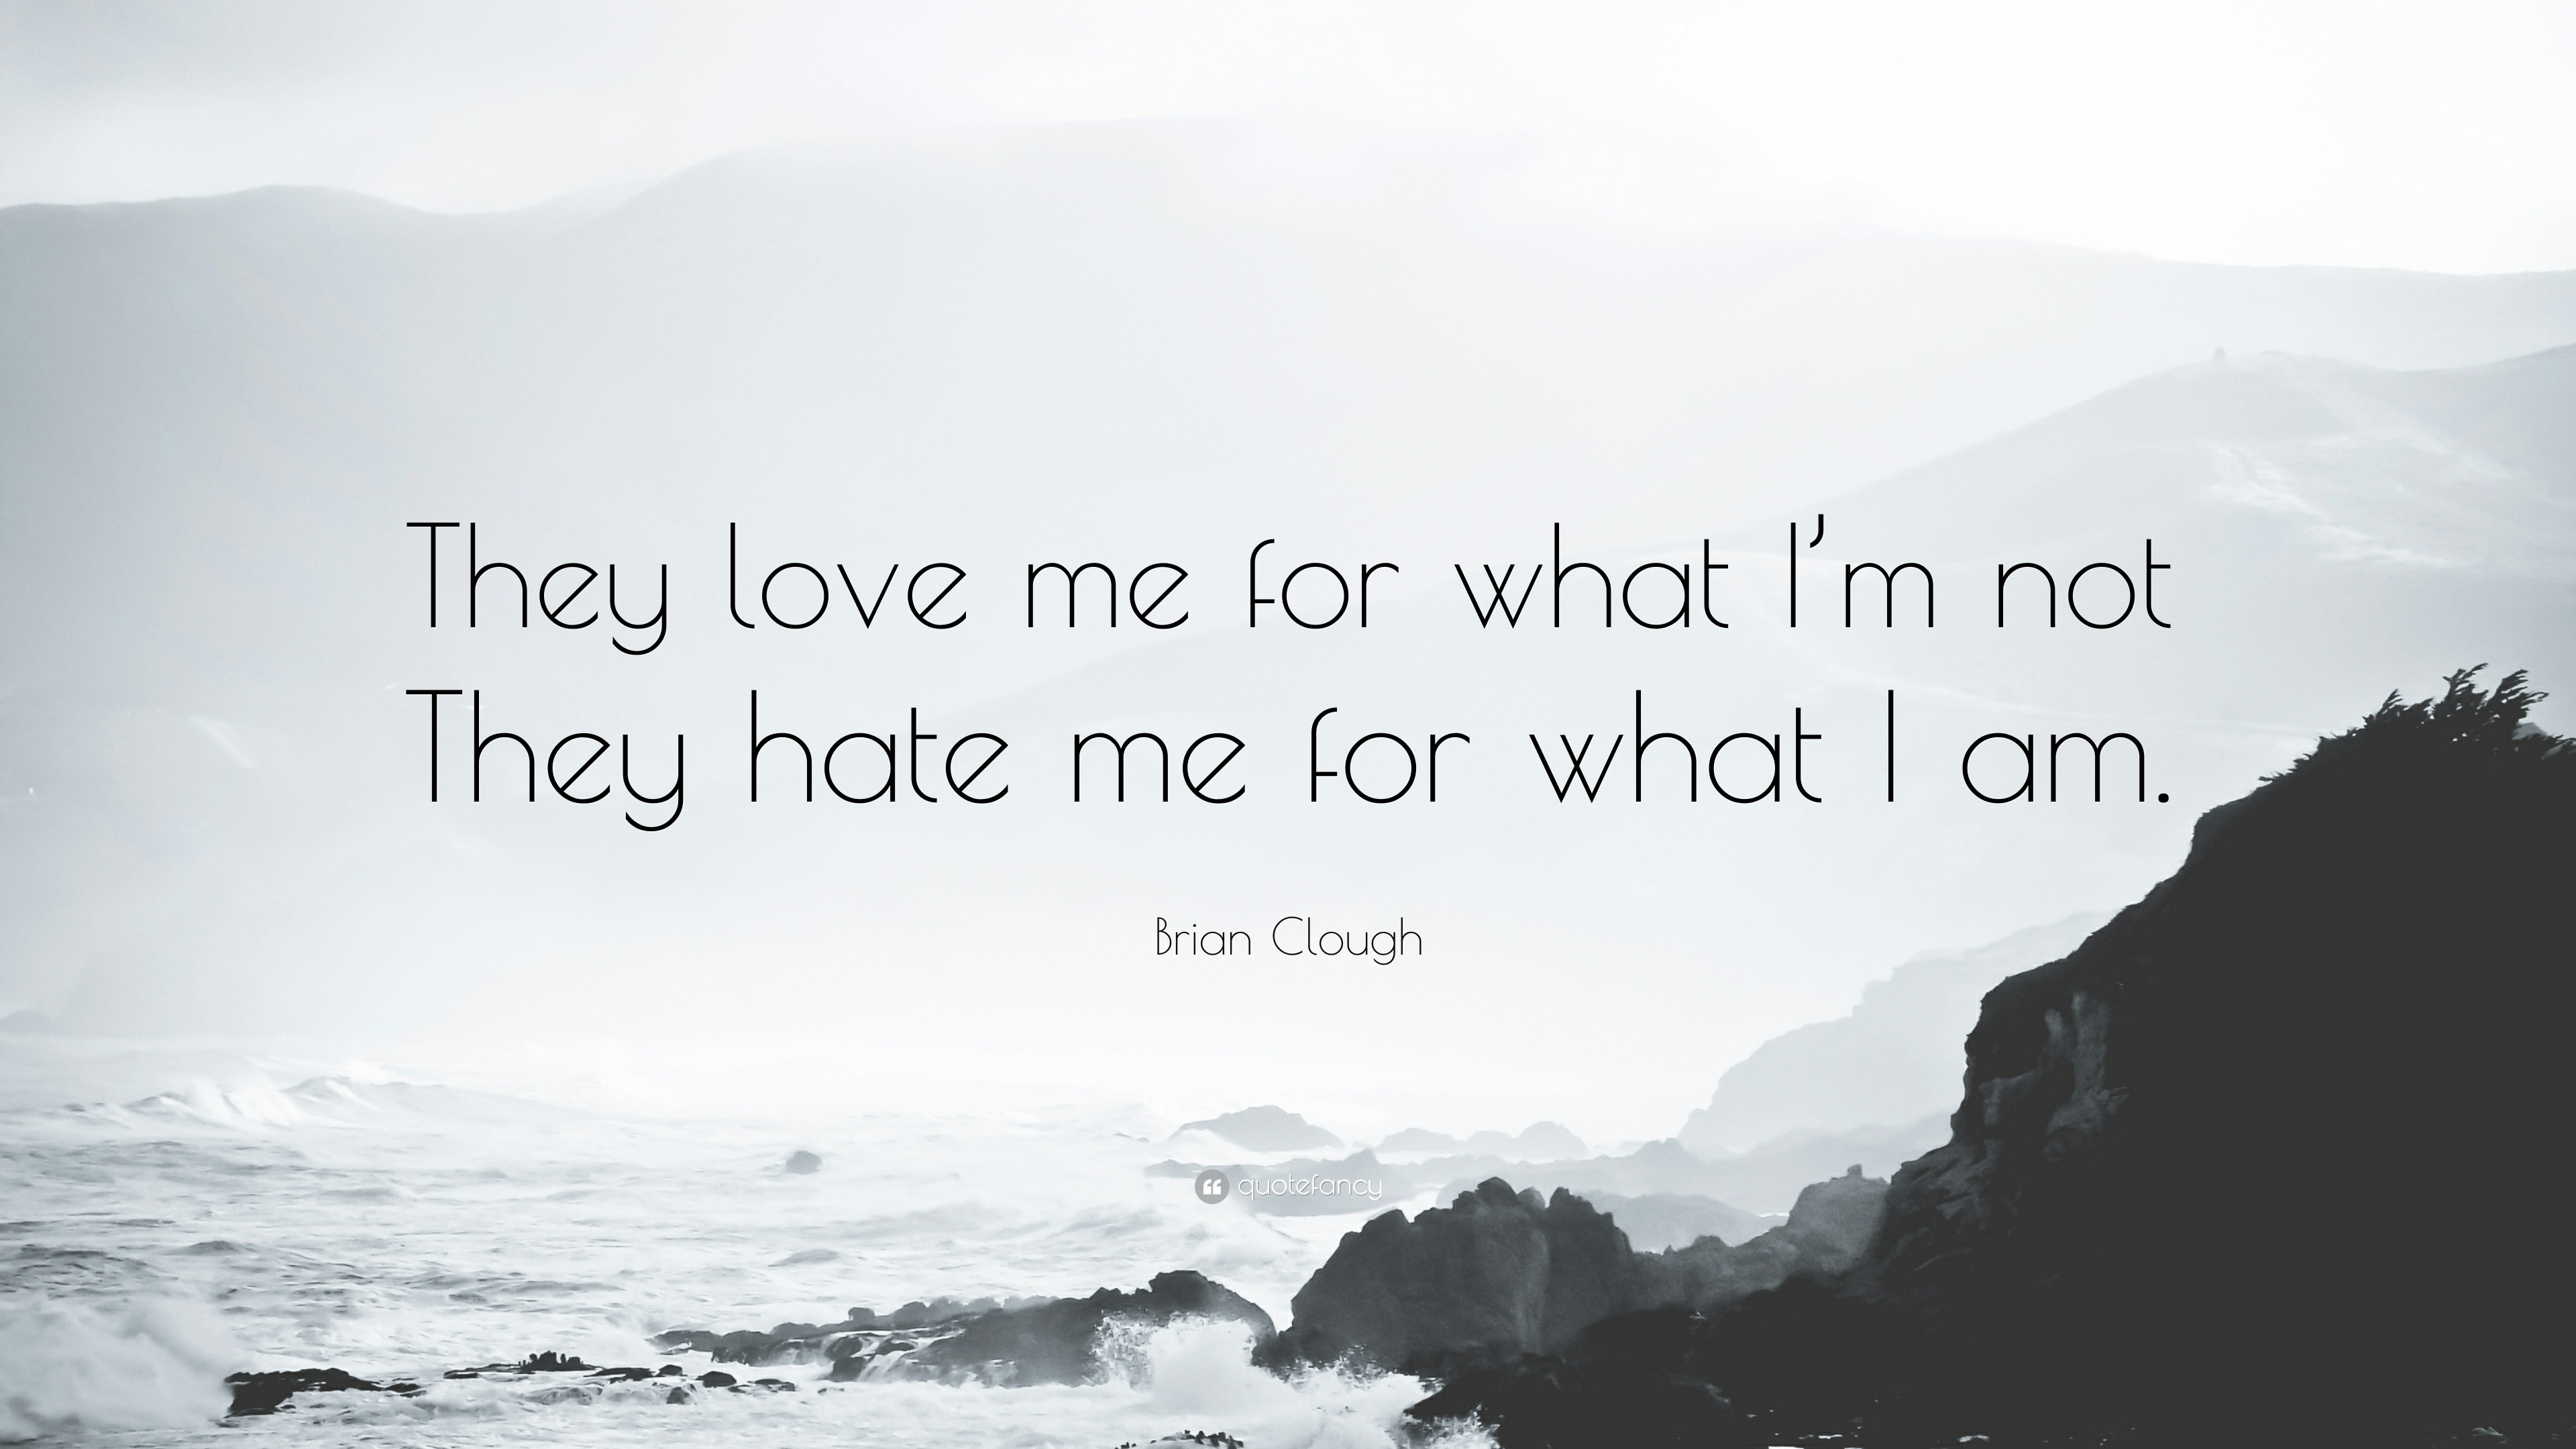 Brian Clough Quote “They love me for what I m not They hate